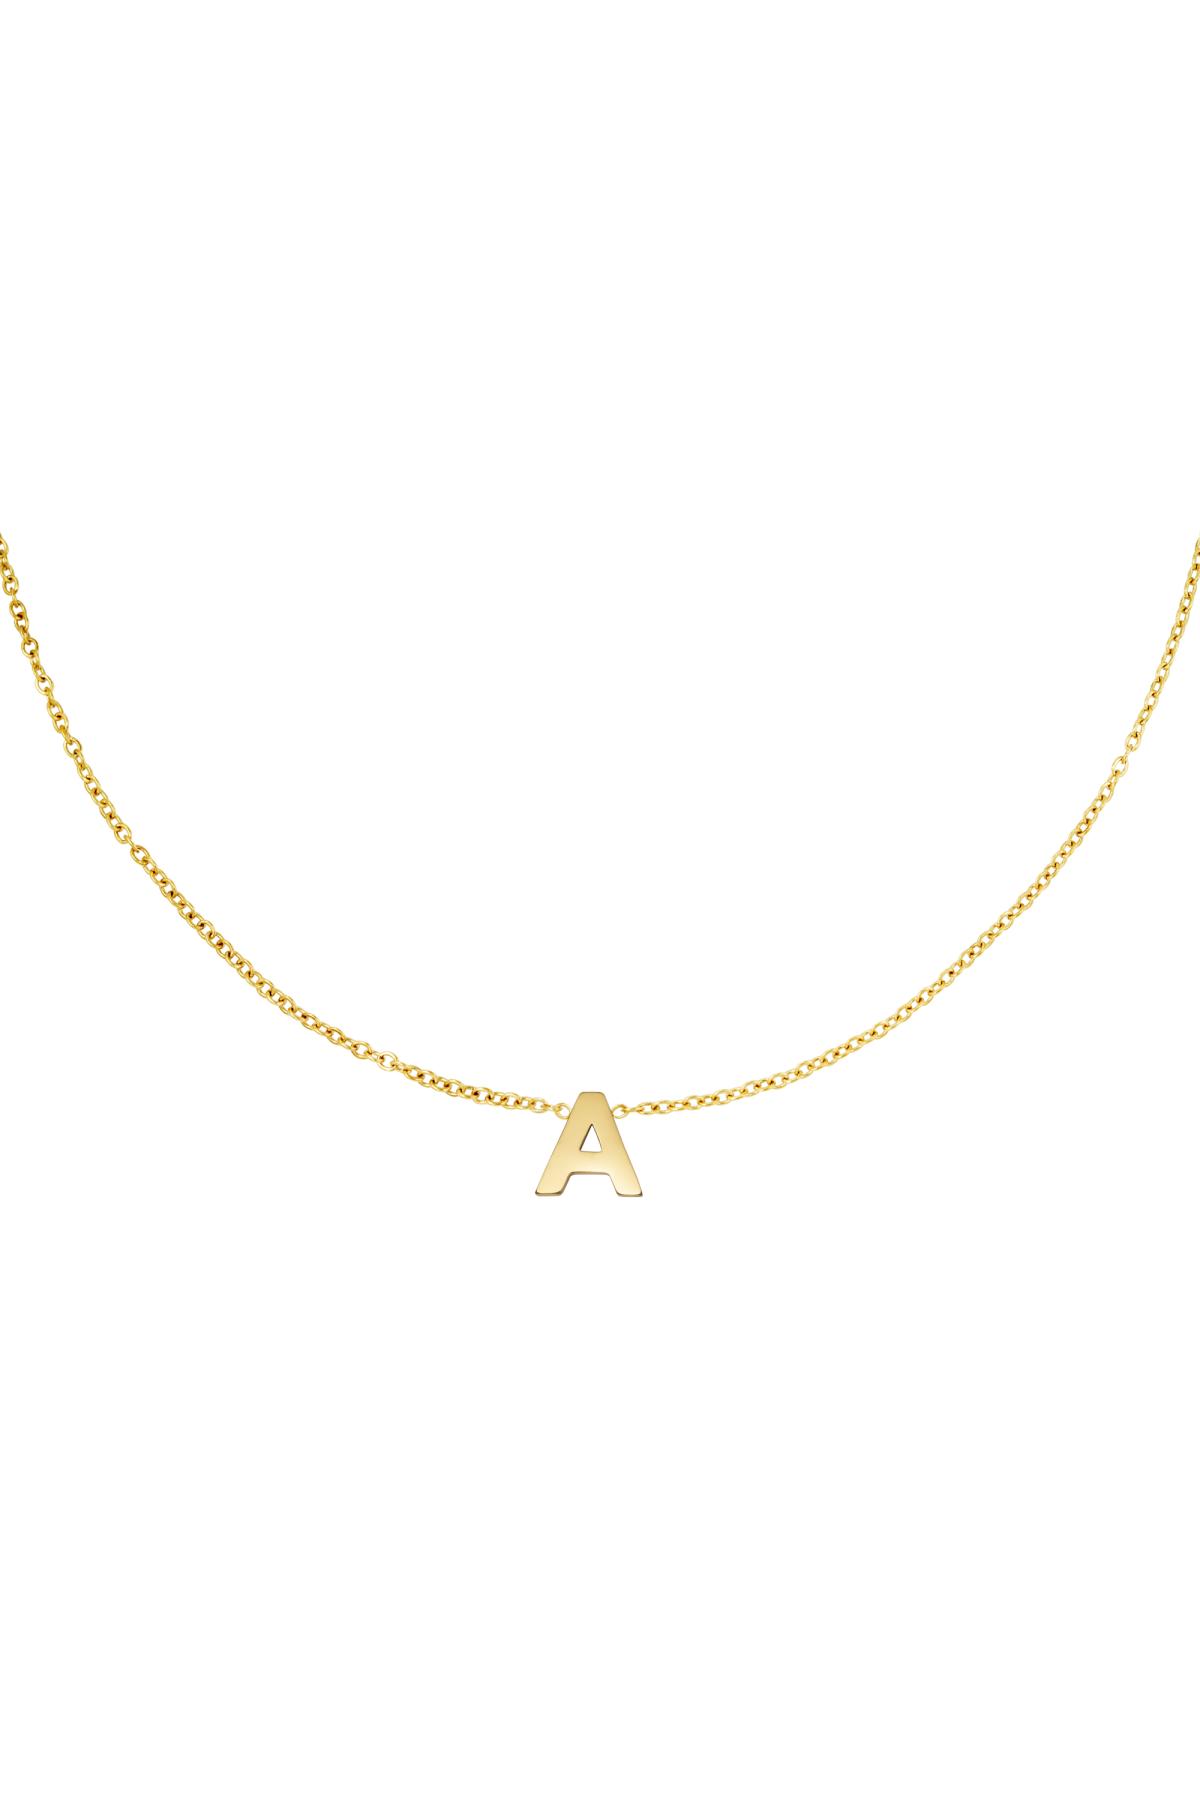 Stainless steel necklace initial A Gold